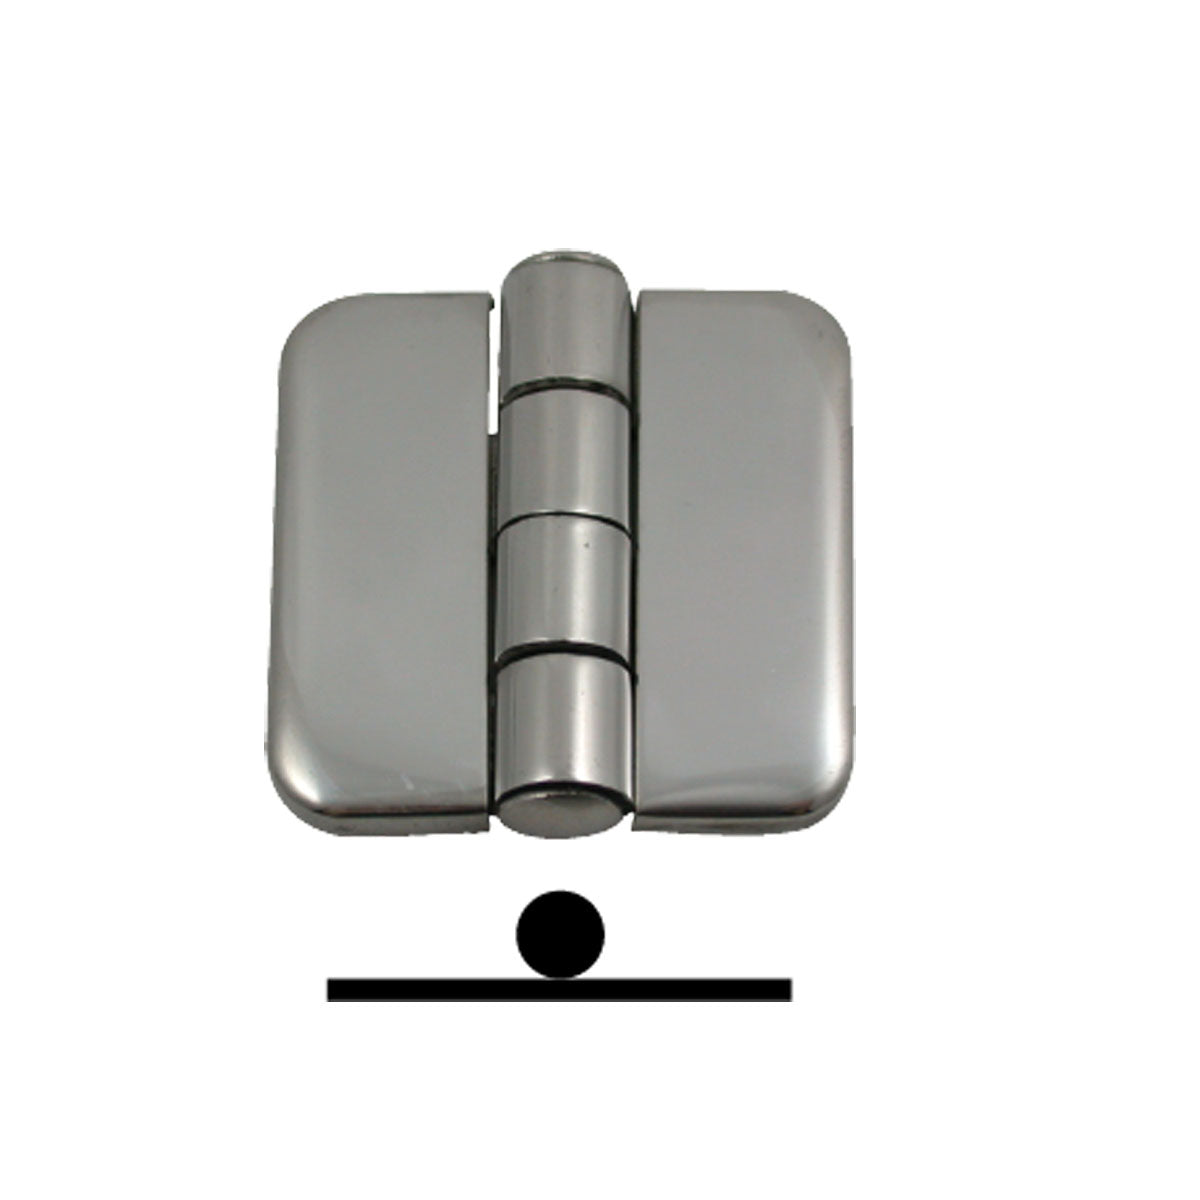 Marine Town® Covered Hinges – Stainless Steel